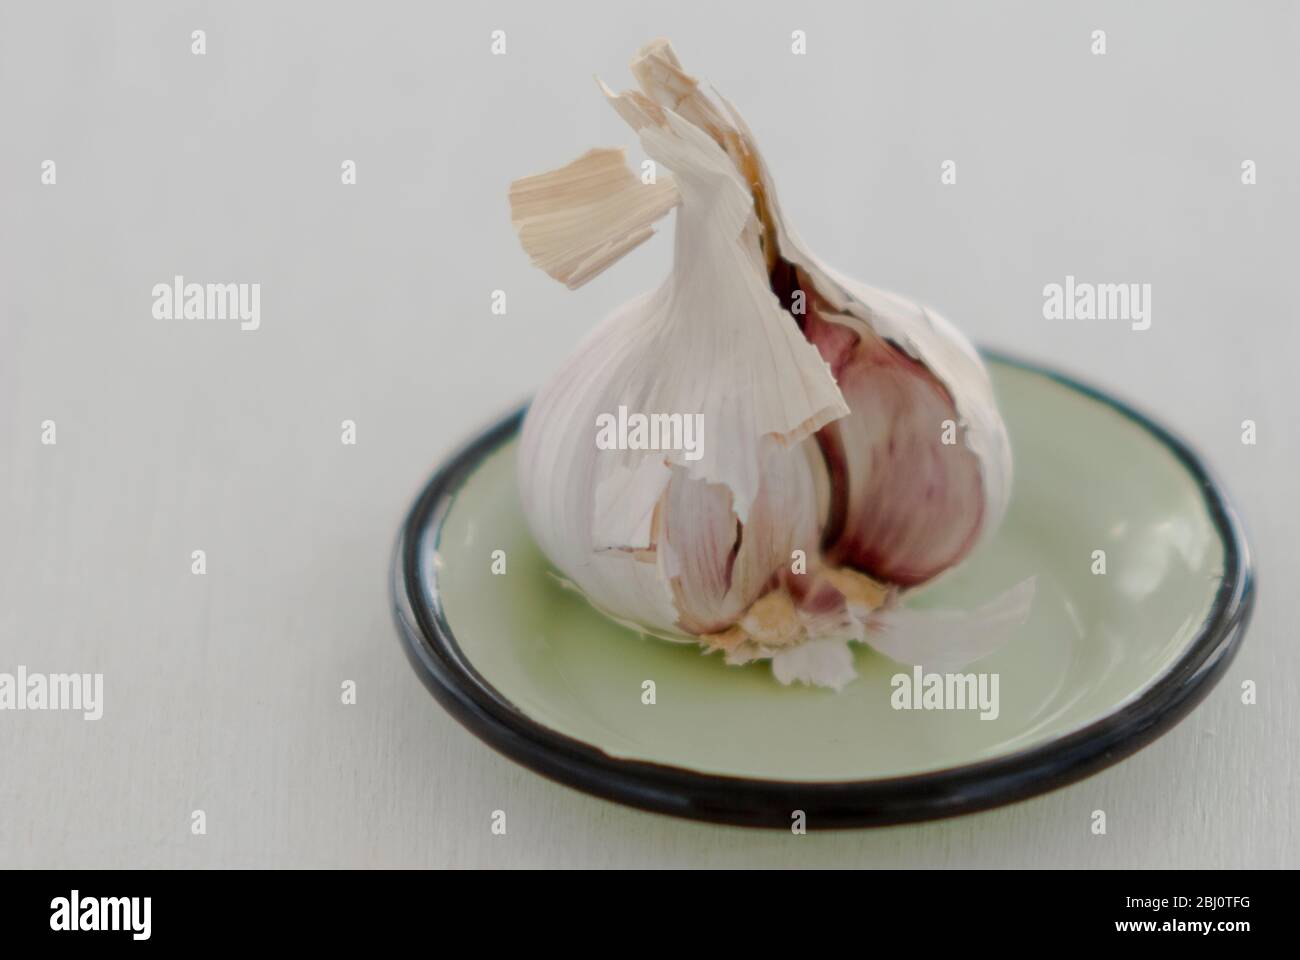 Opened head of garlic on small green enamel saucer against white background - Stock Photo